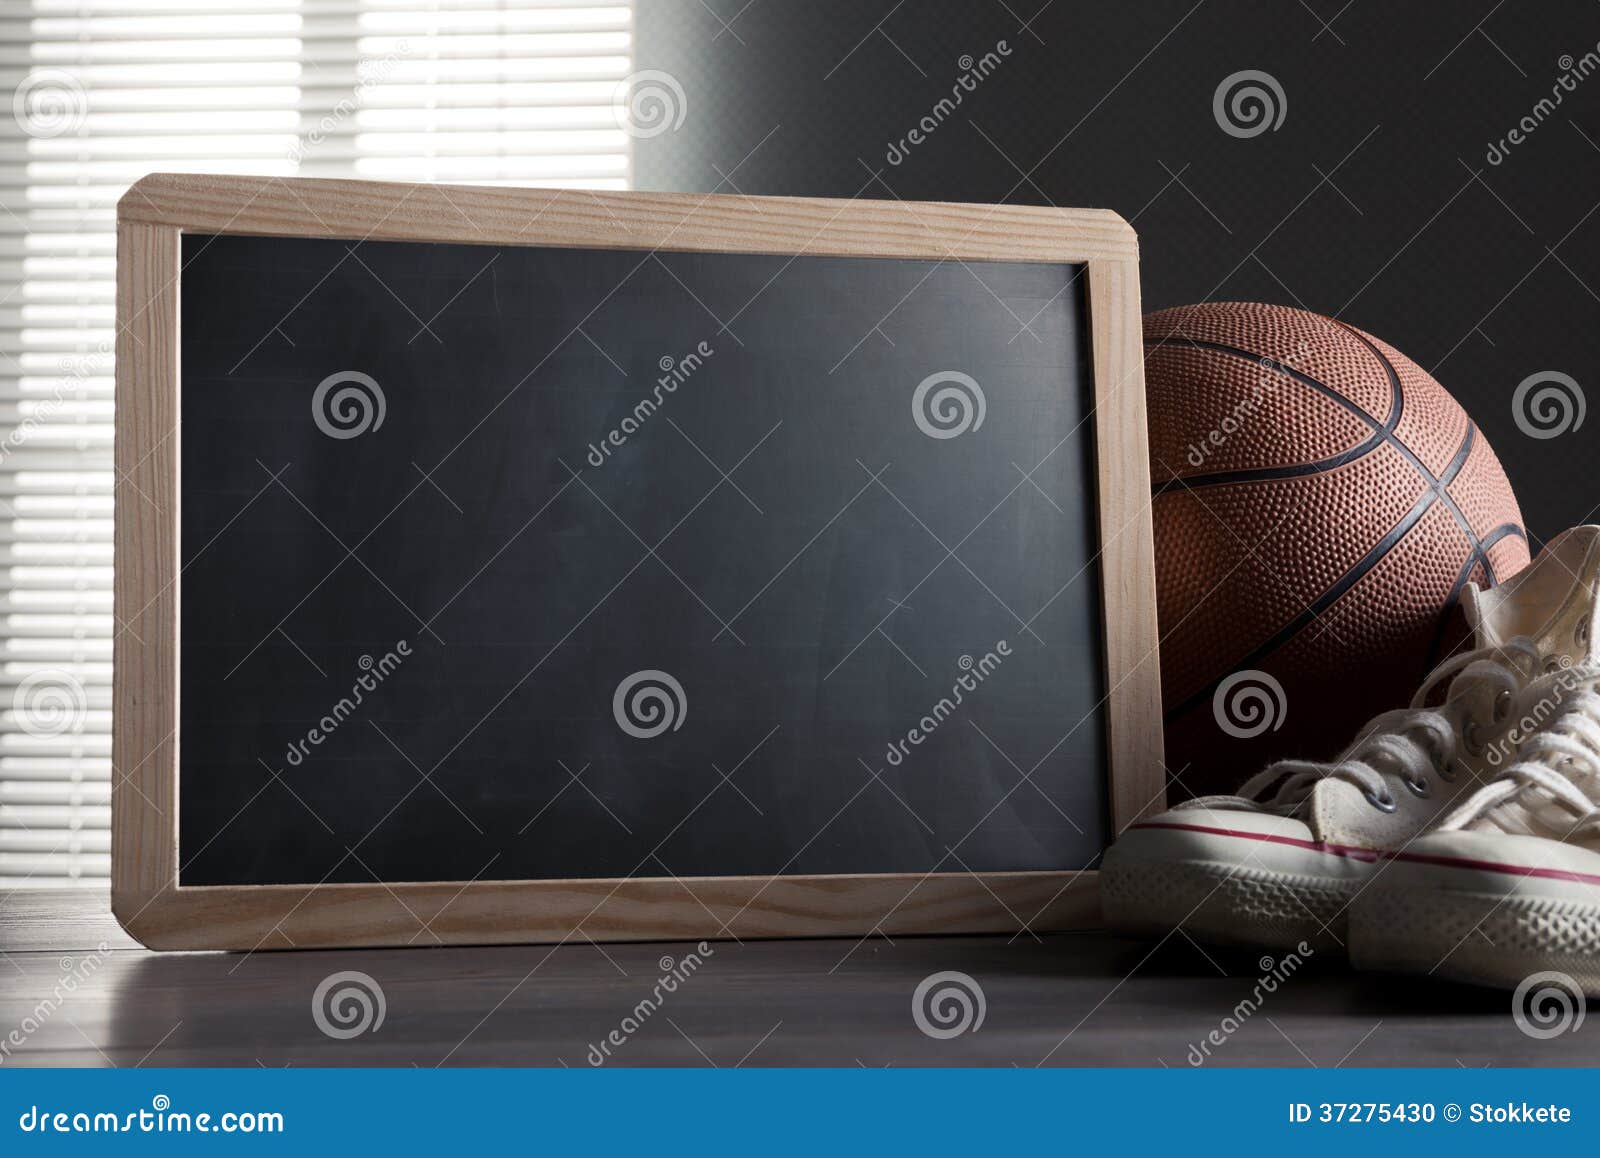 Blackboard with Canvas Shoes and Basketball Stock Photo - Image of ...